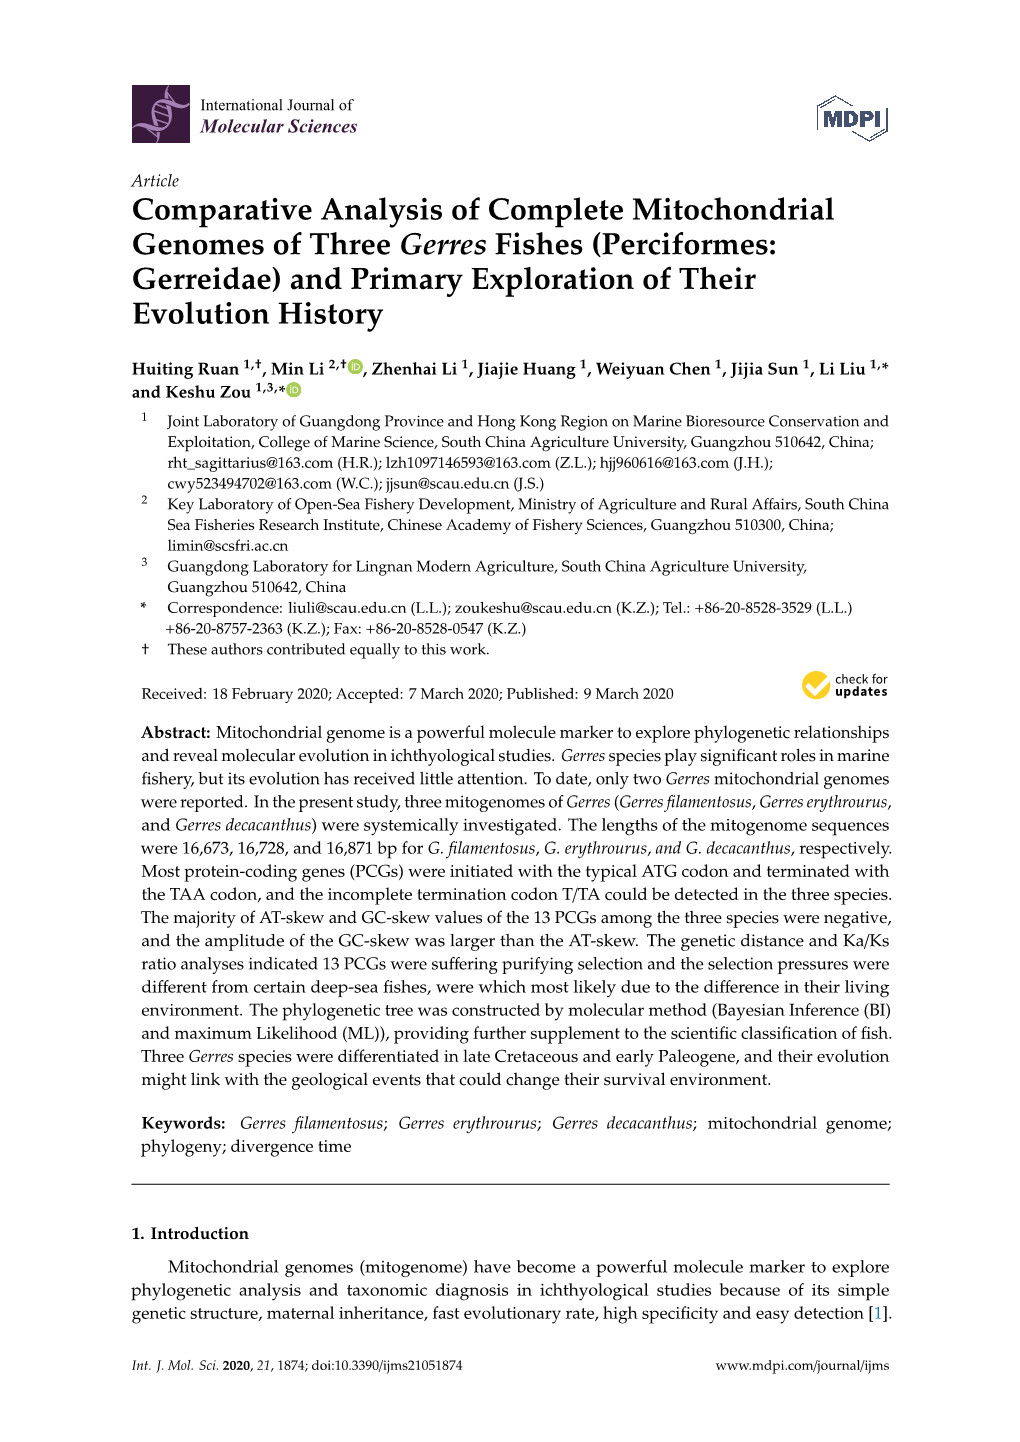 Comparative Analysis of Complete Mitochondrial Genomes of Three Gerres Fishes (Perciformes: Gerreidae) and Primary Exploration of Their Evolution History